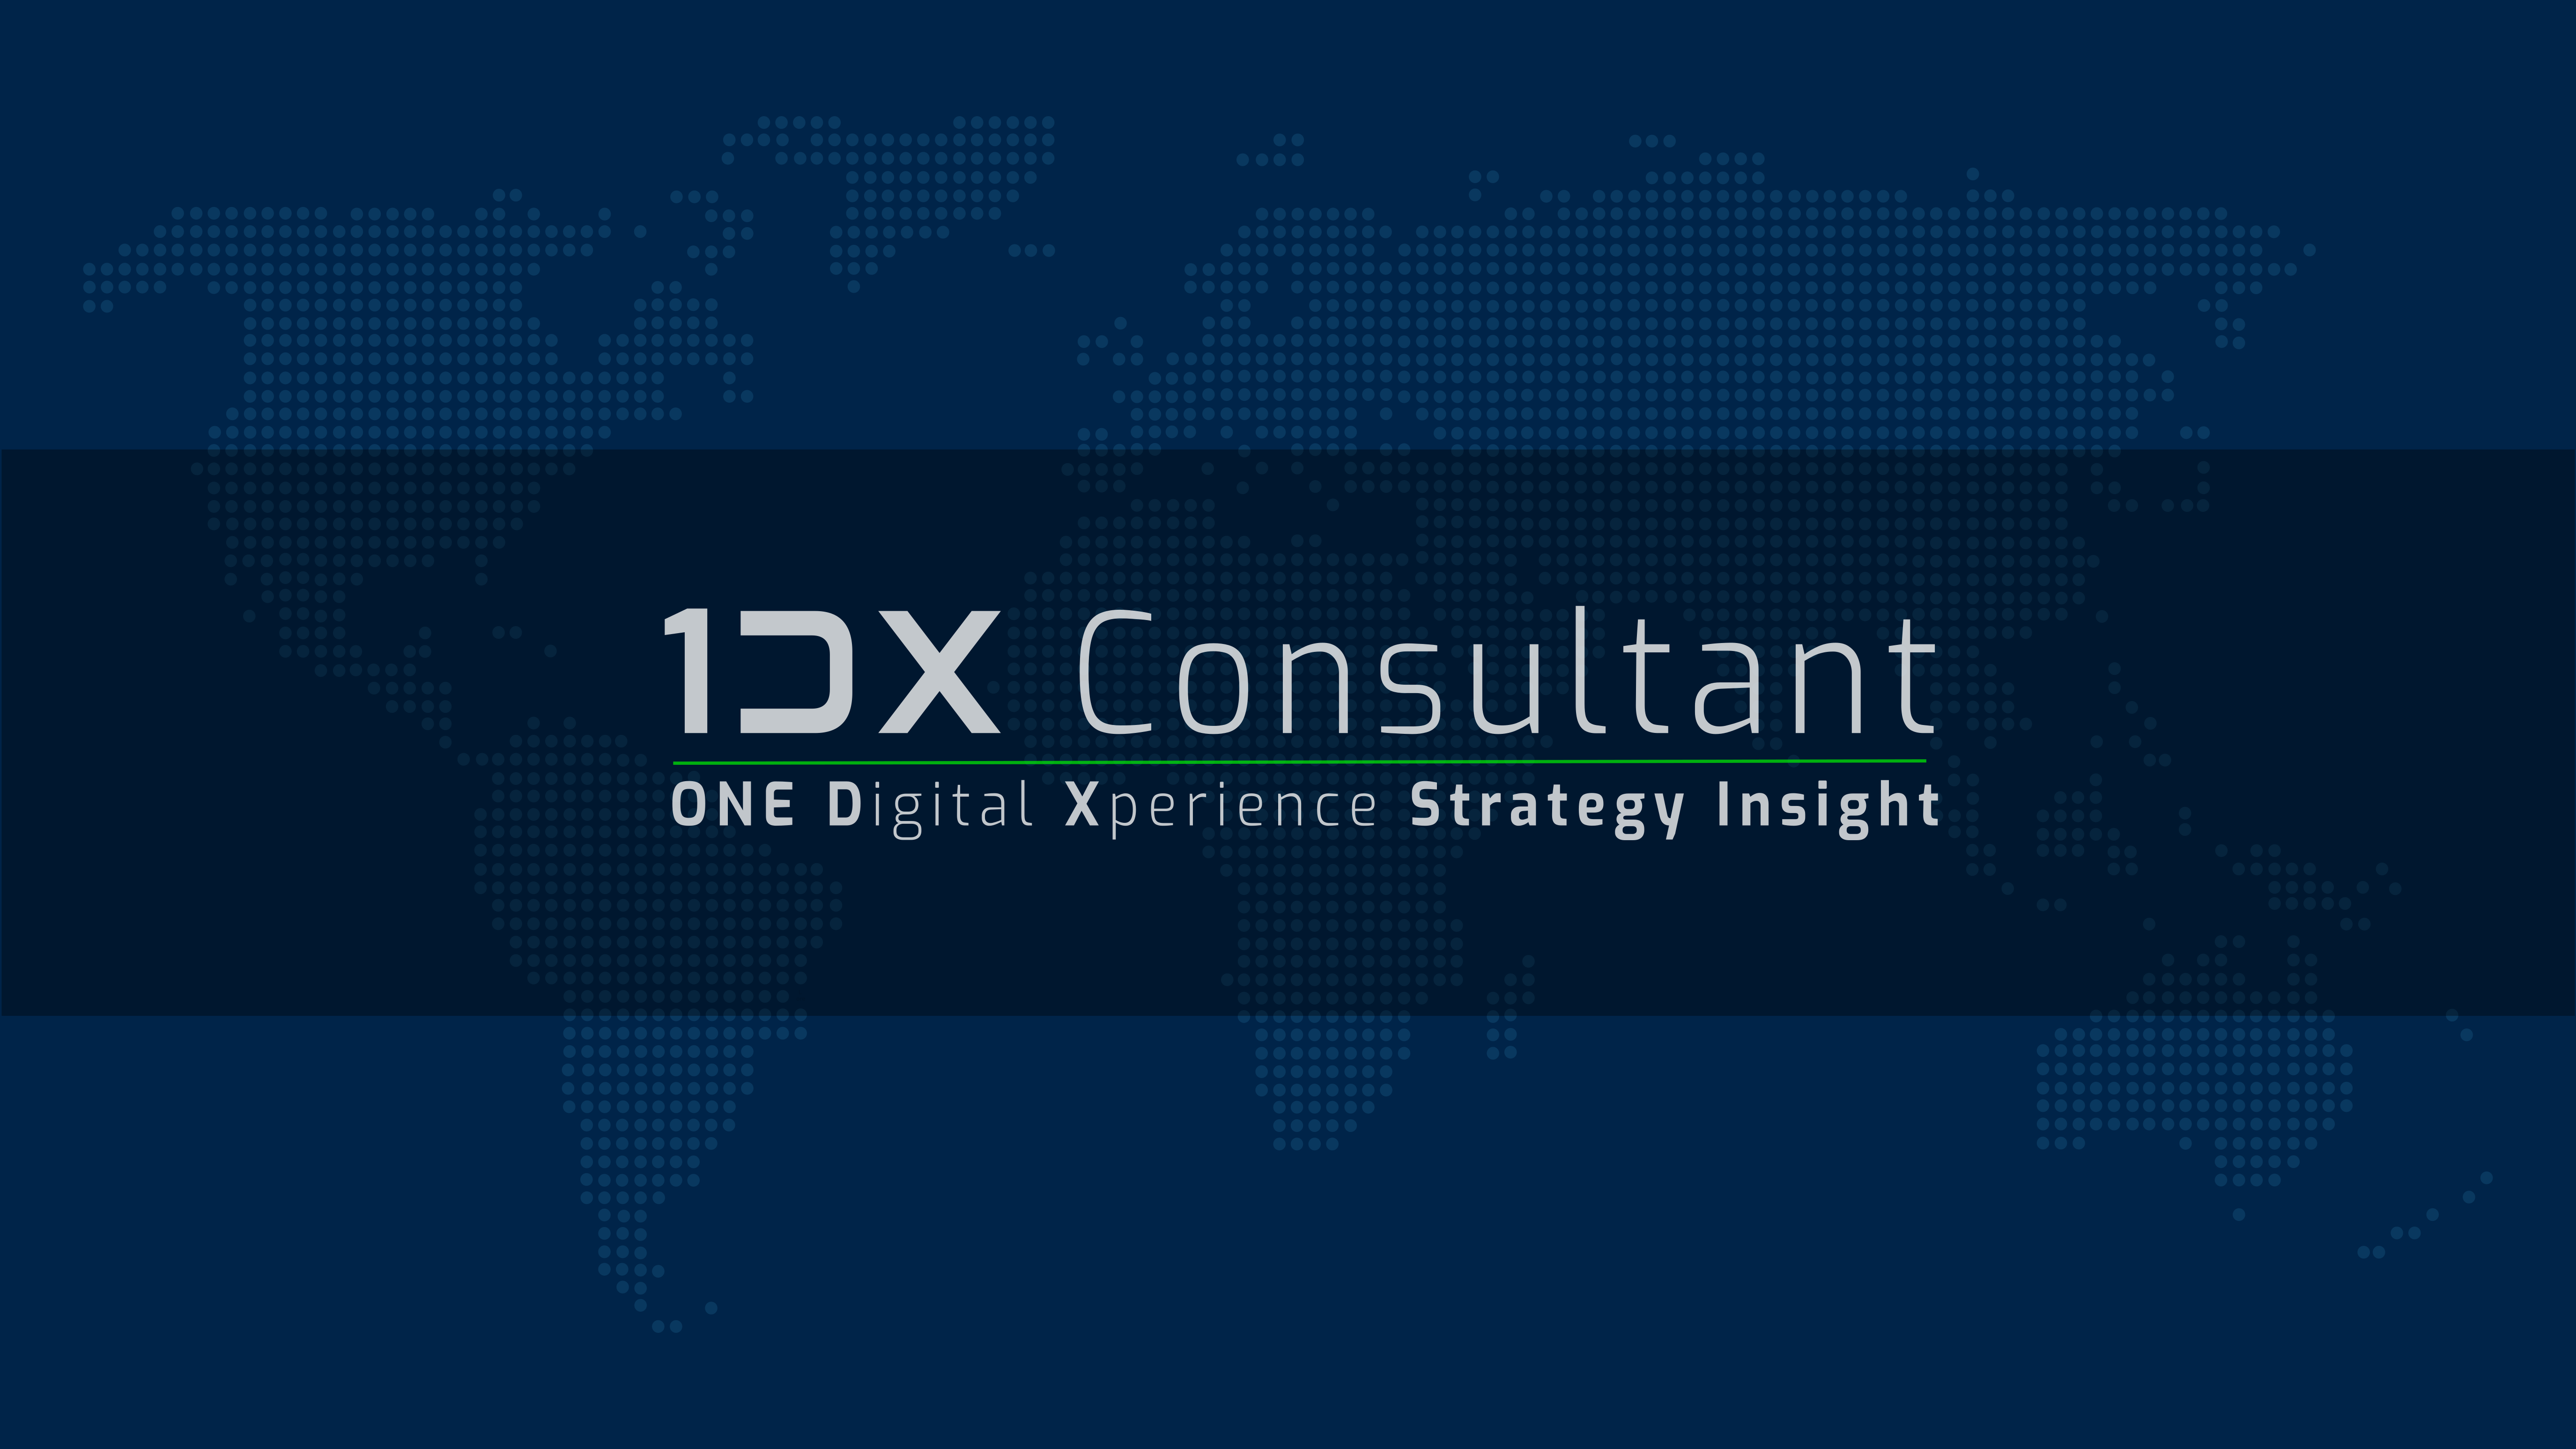 DX Consultant by LoneSync Digital Xperience Studio